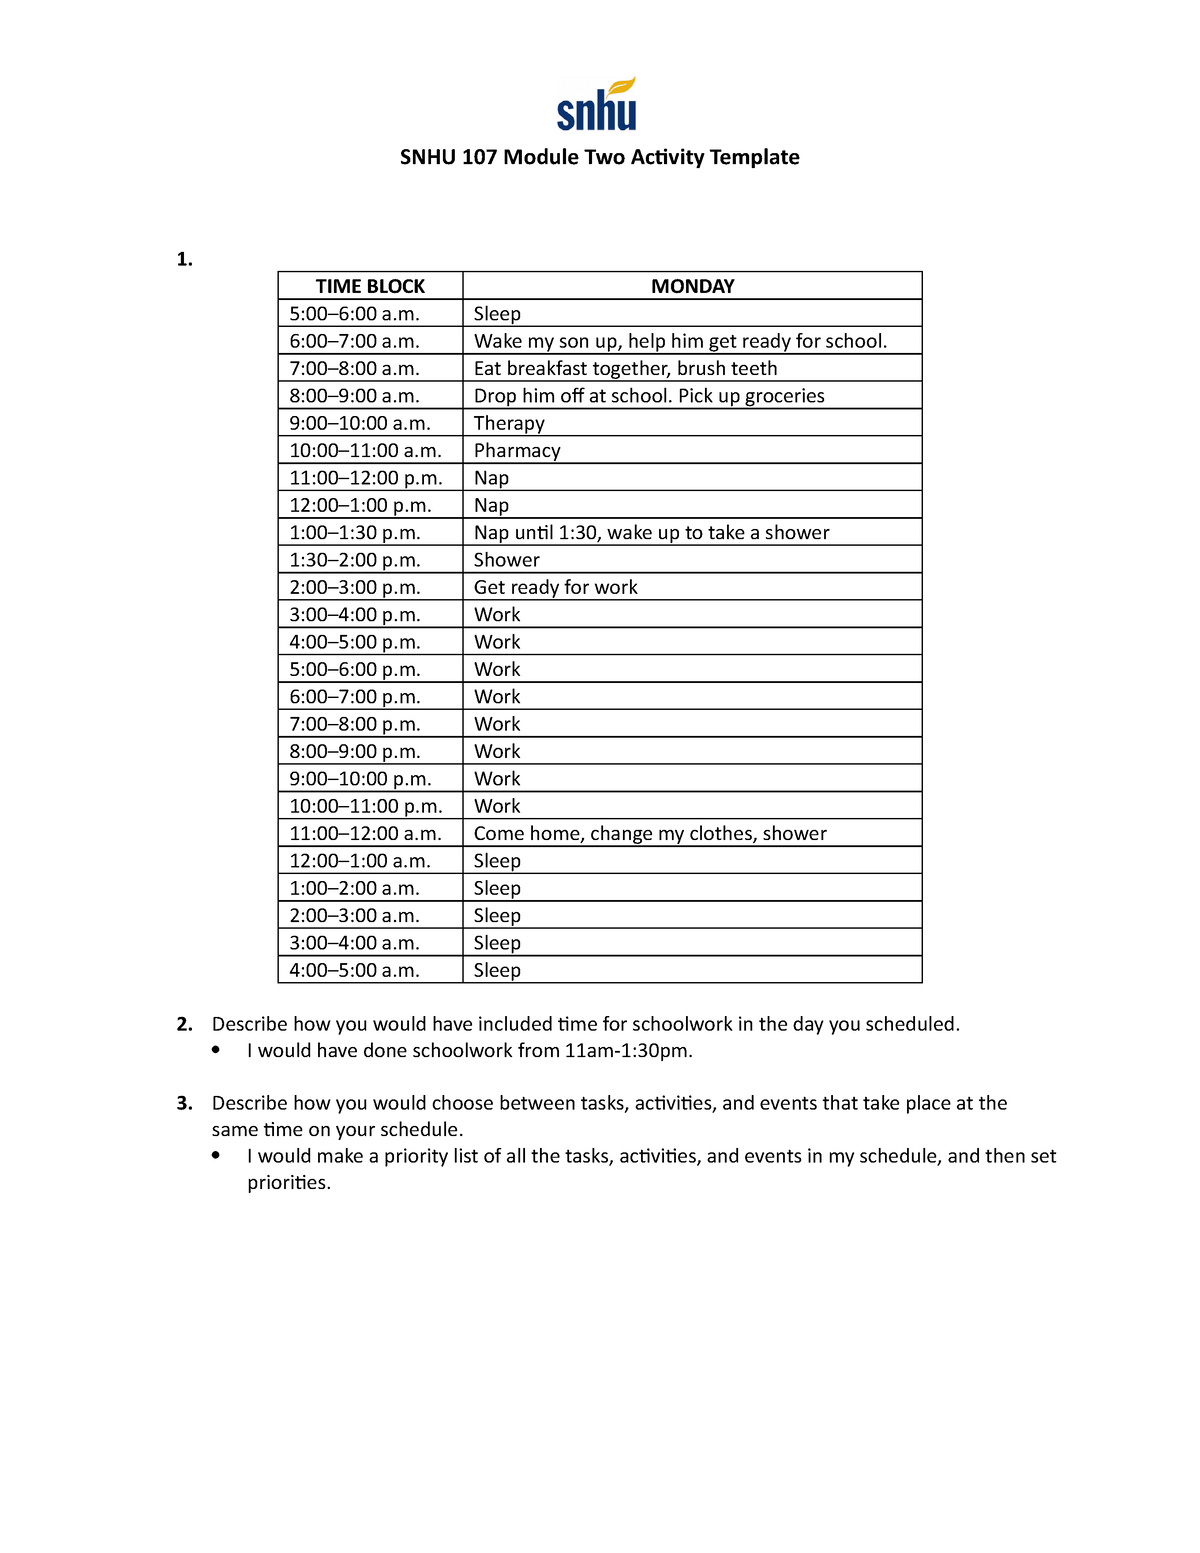 snhu-107-module-two-activity-template-time-block-monday-5-00-6-00-a